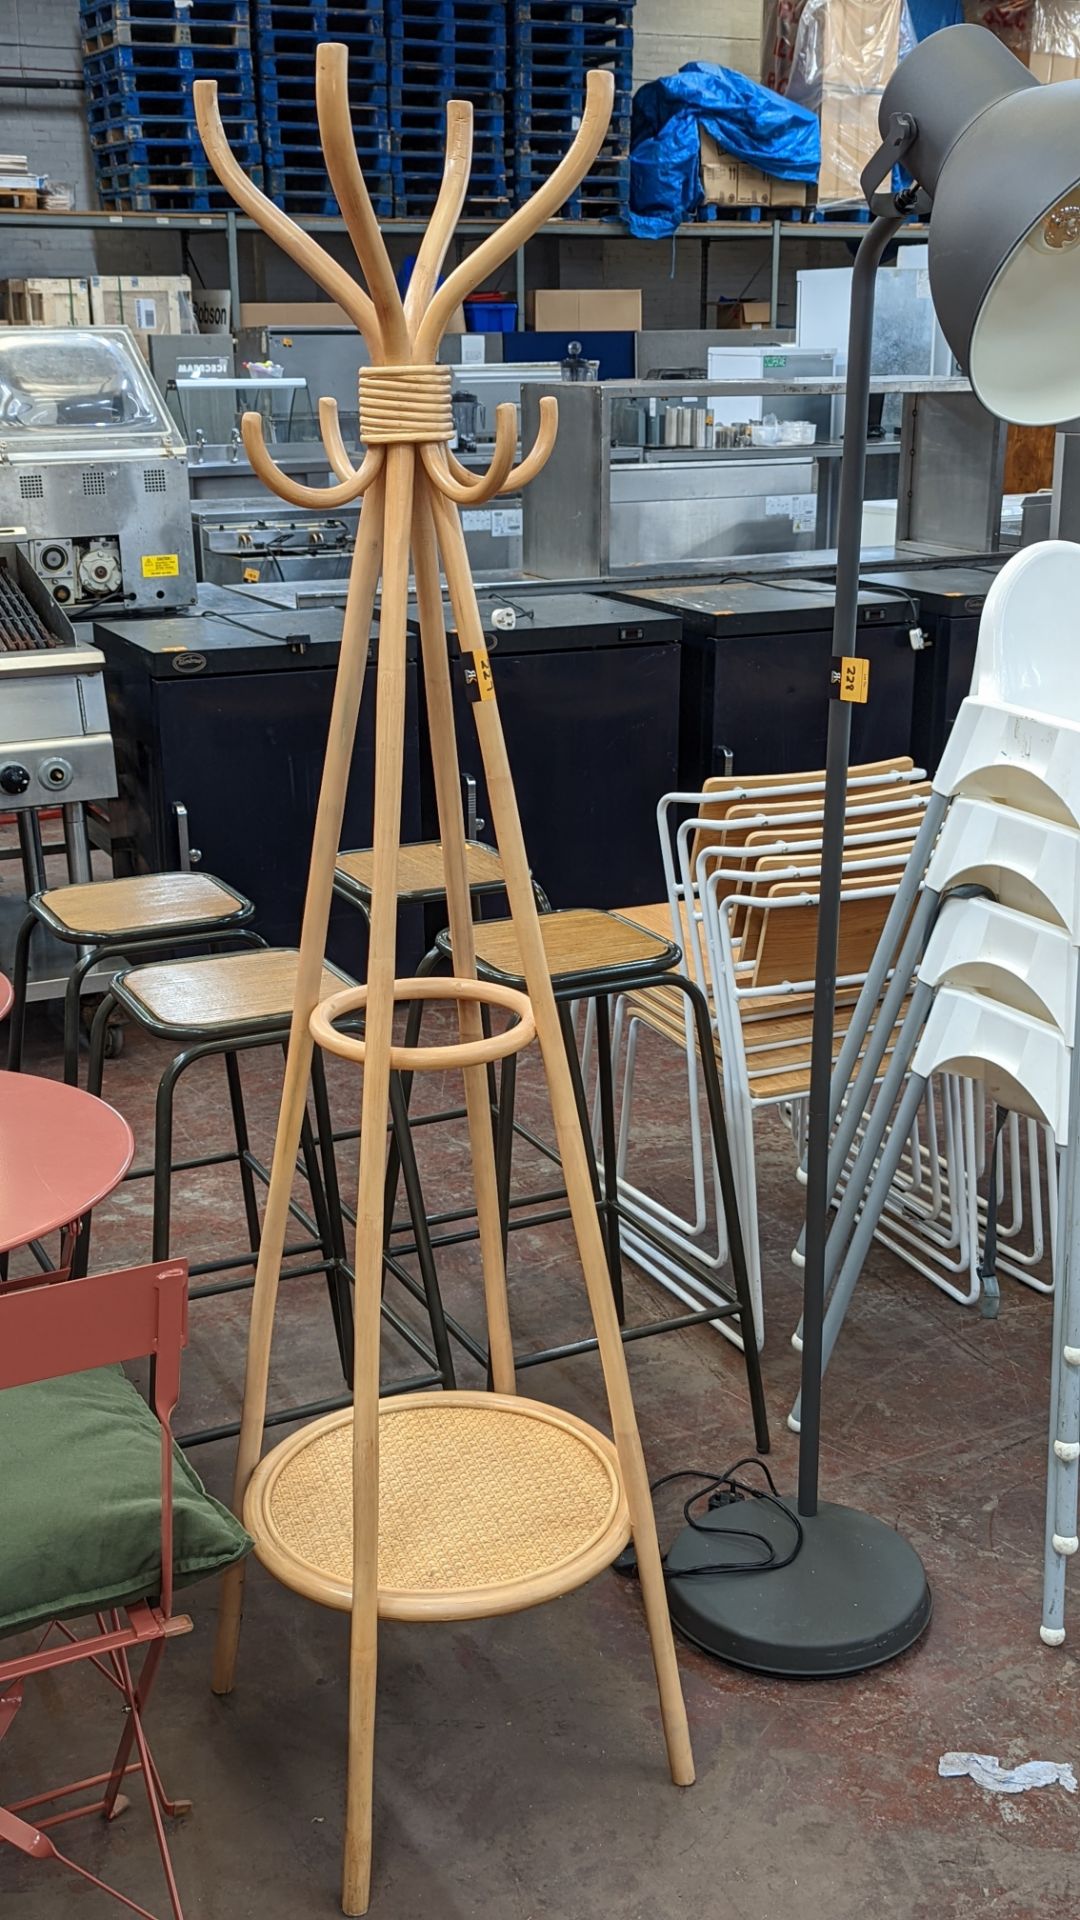 Wooden coat stand - Image 2 of 2